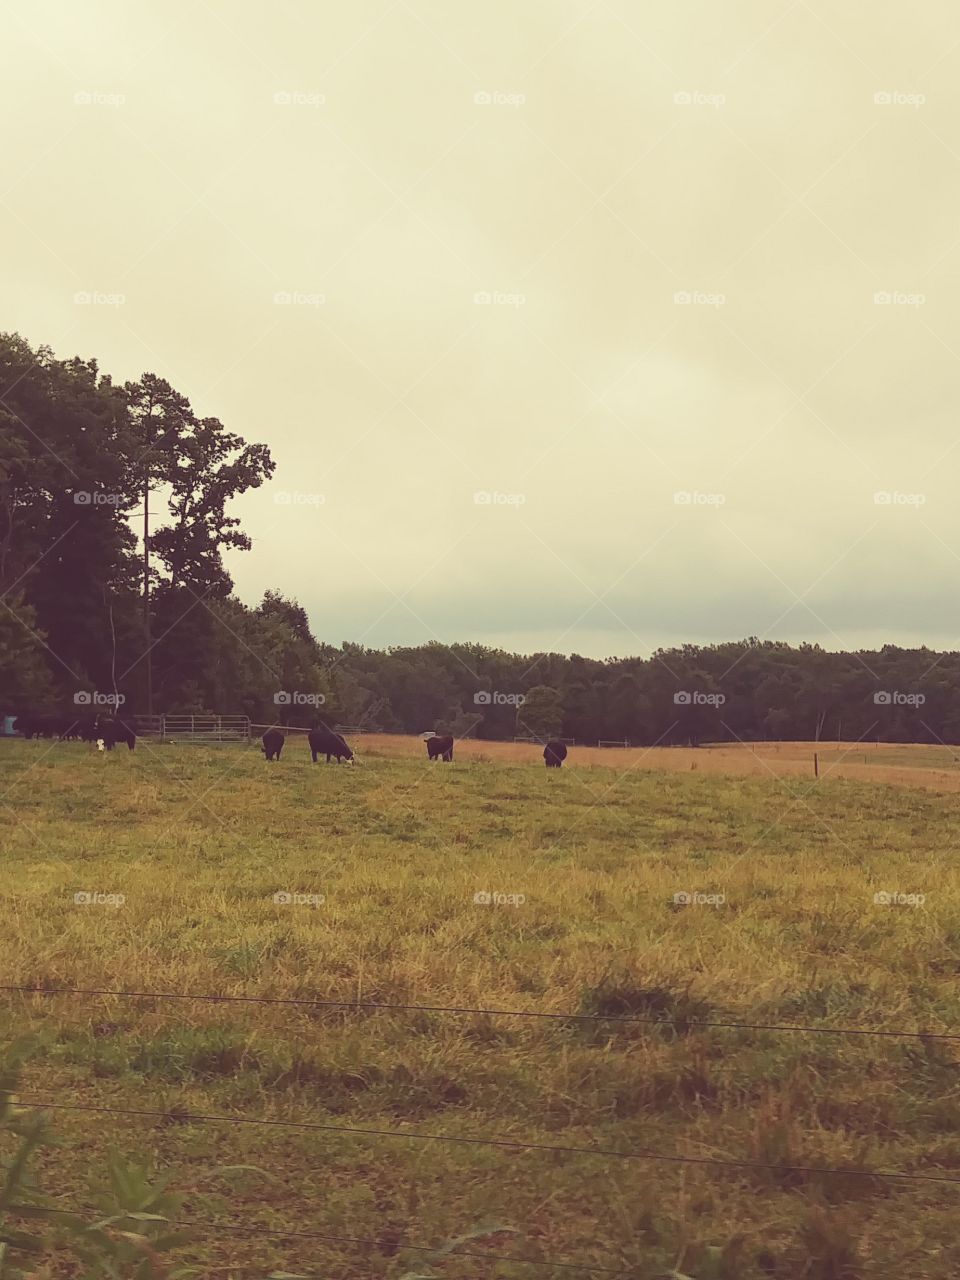 cows in pasture in the distance. photo taken from hwy.